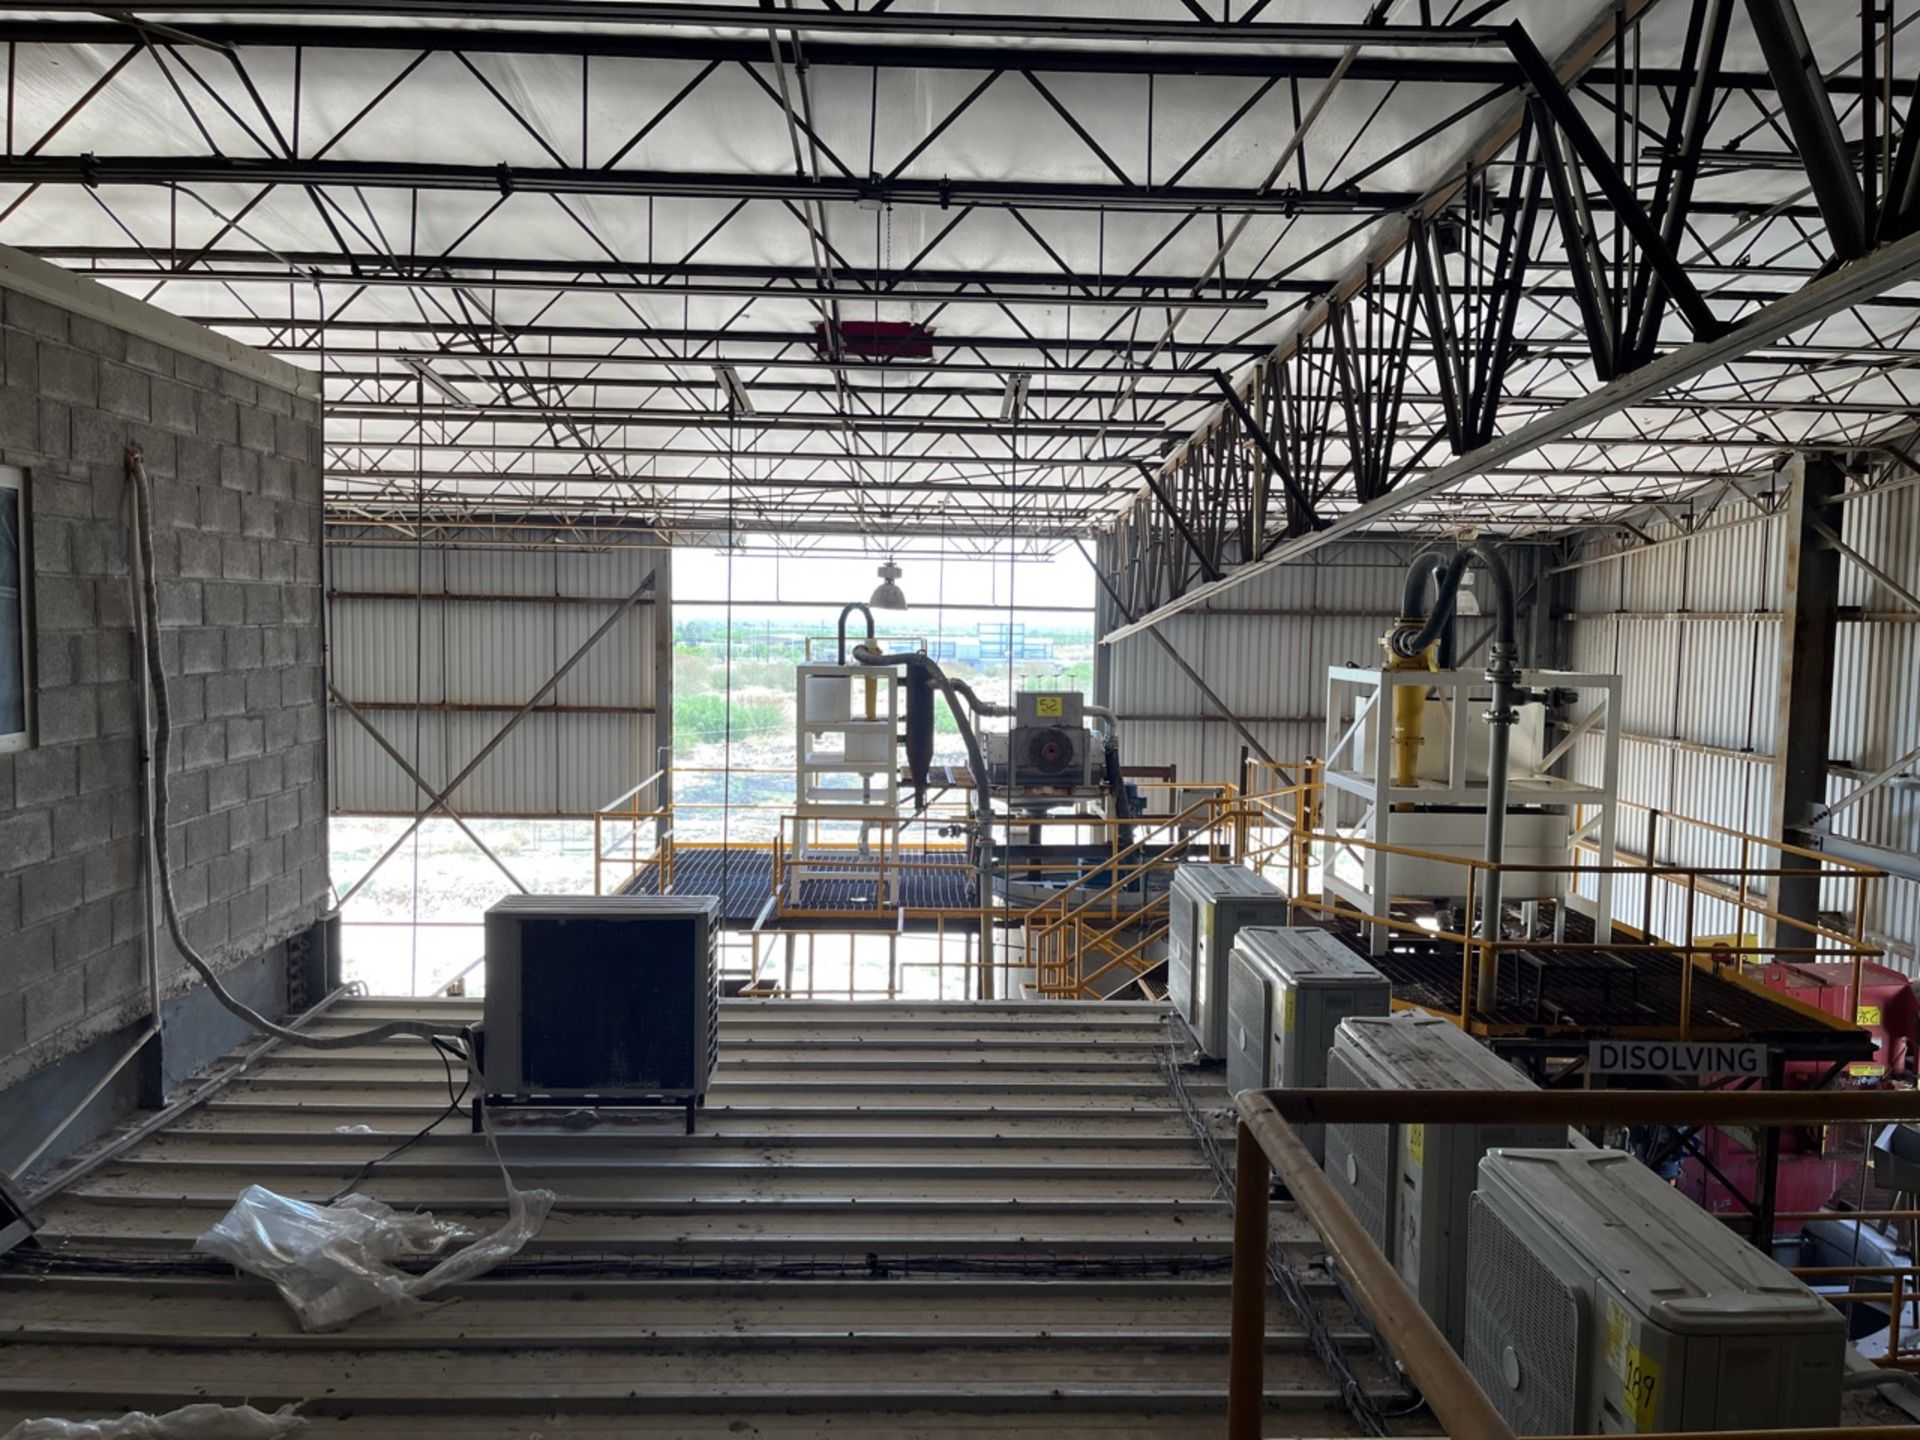 Complete Industrial Warehouse Structure - Image 131 of 141